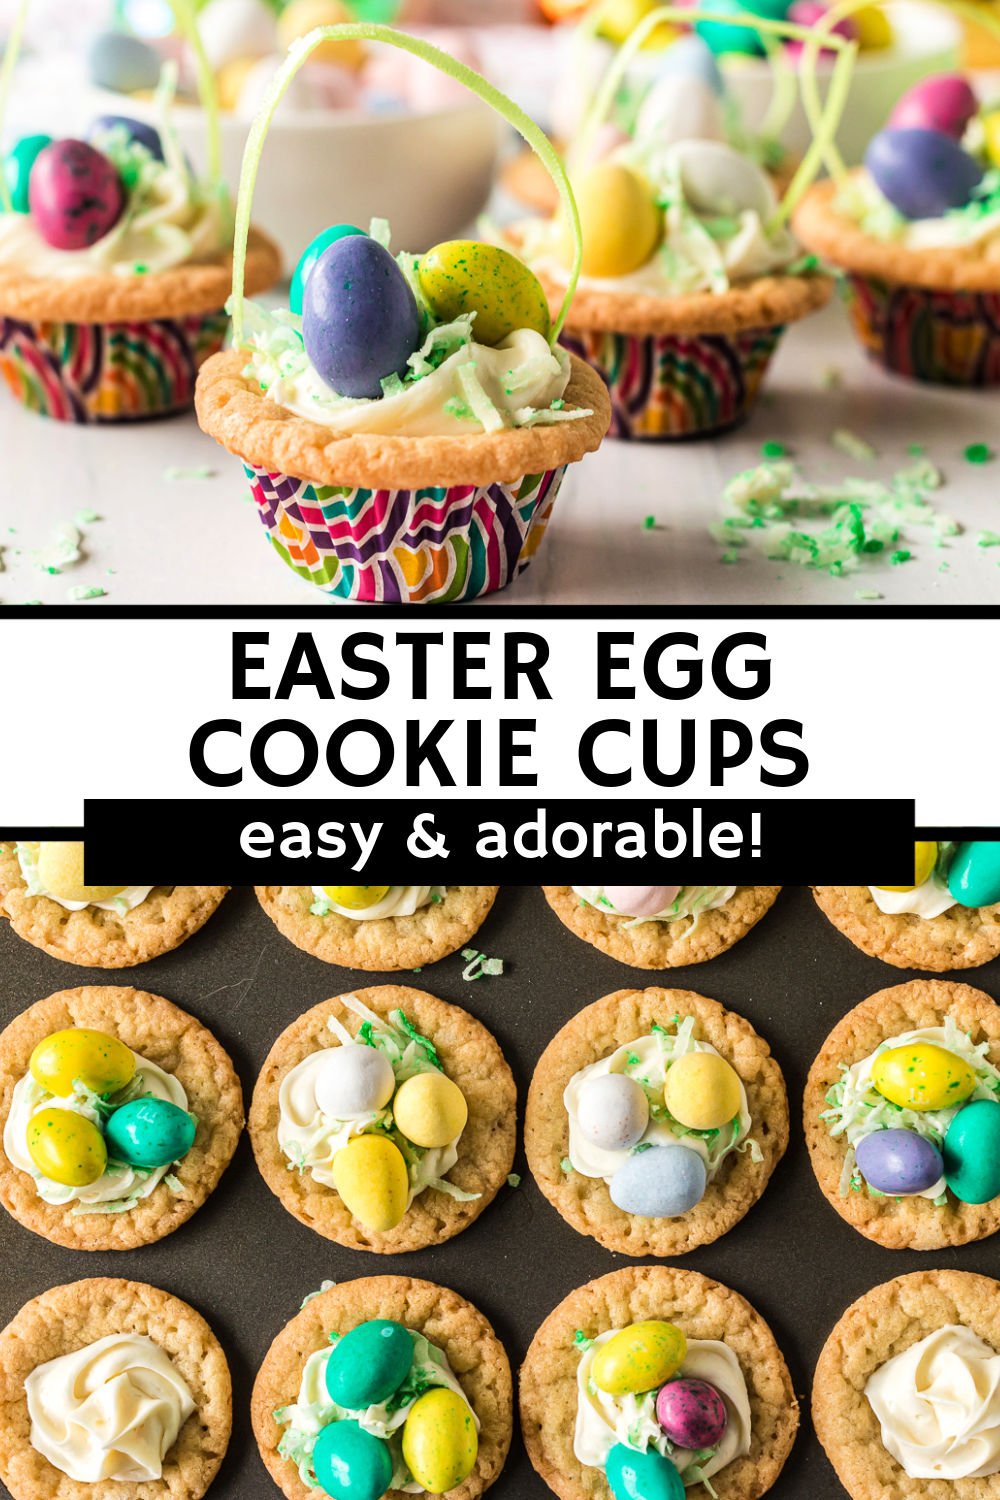 Adorable and easy Easter Basket Cookie Cups start with a sugar cookie cup that is filled with frosting, topped with dyed green coconut, stuffed with egg shaped candies, and finished with an edible grass handle. These simple treats are fun to make with kids and serve on an Easter dessert table. | www.persnicketyplates.com